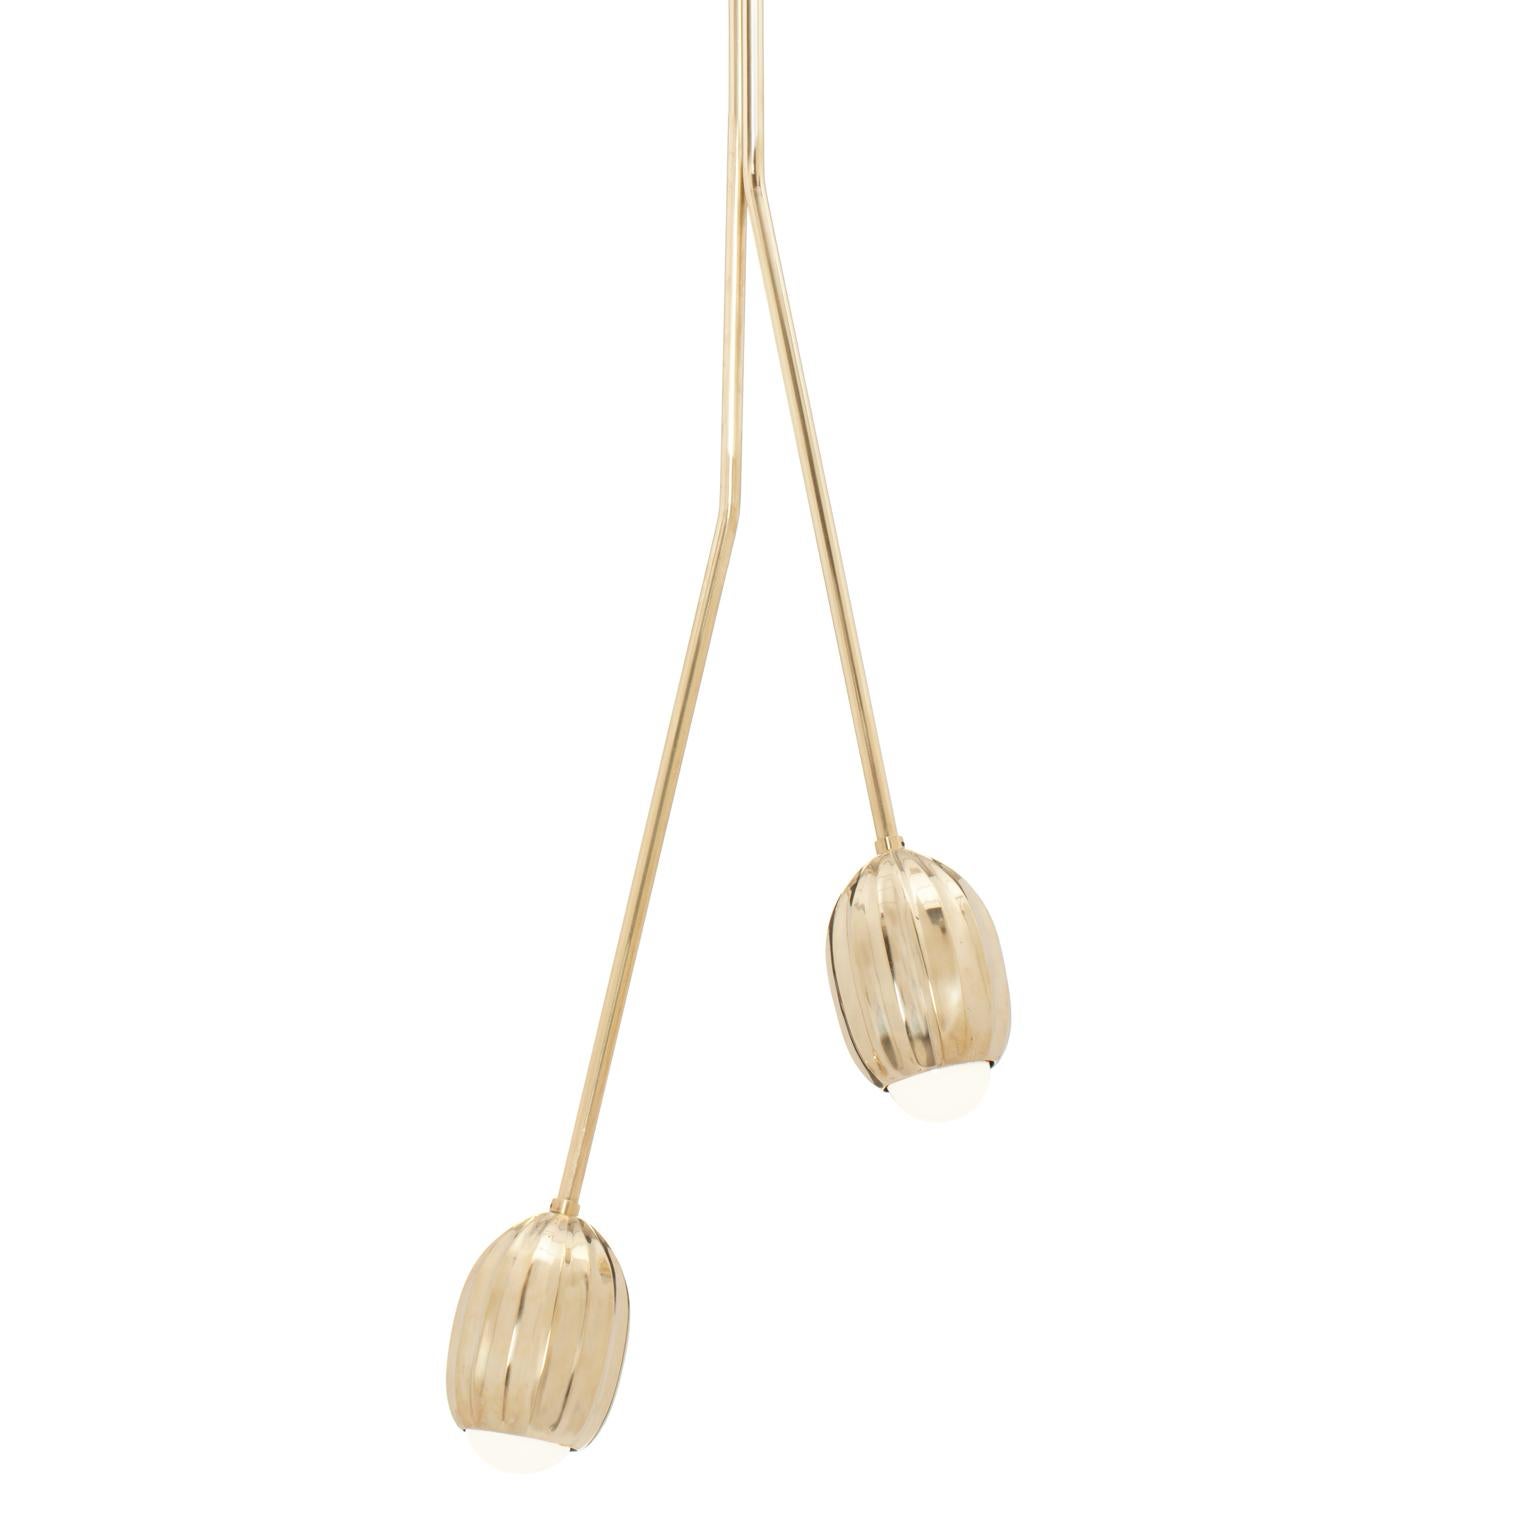 Poppy Polished Brass 2 Stem V Chandelier by Fred and Juul
Dimensions: Ø 10 x D 300 cm.
Materials: Polished brass.

Available in polished brass or blackened brass. Custom sizes, materials or finishes are available on request. Please contact us.

All